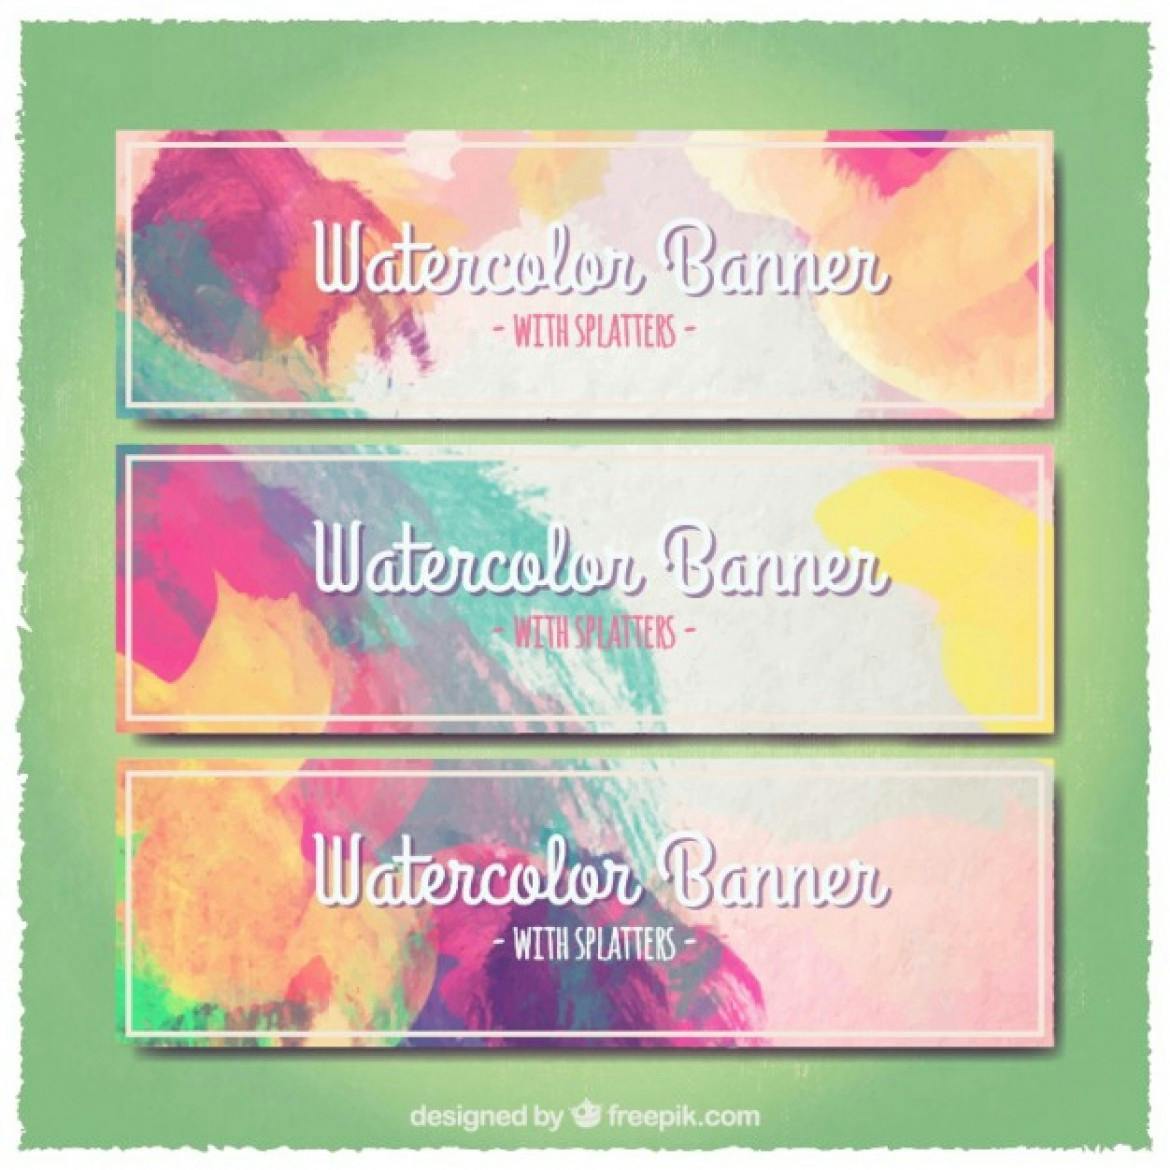 wpid-watercolor-banners-in-hand-painted-style_23-2147523455-1170x1170